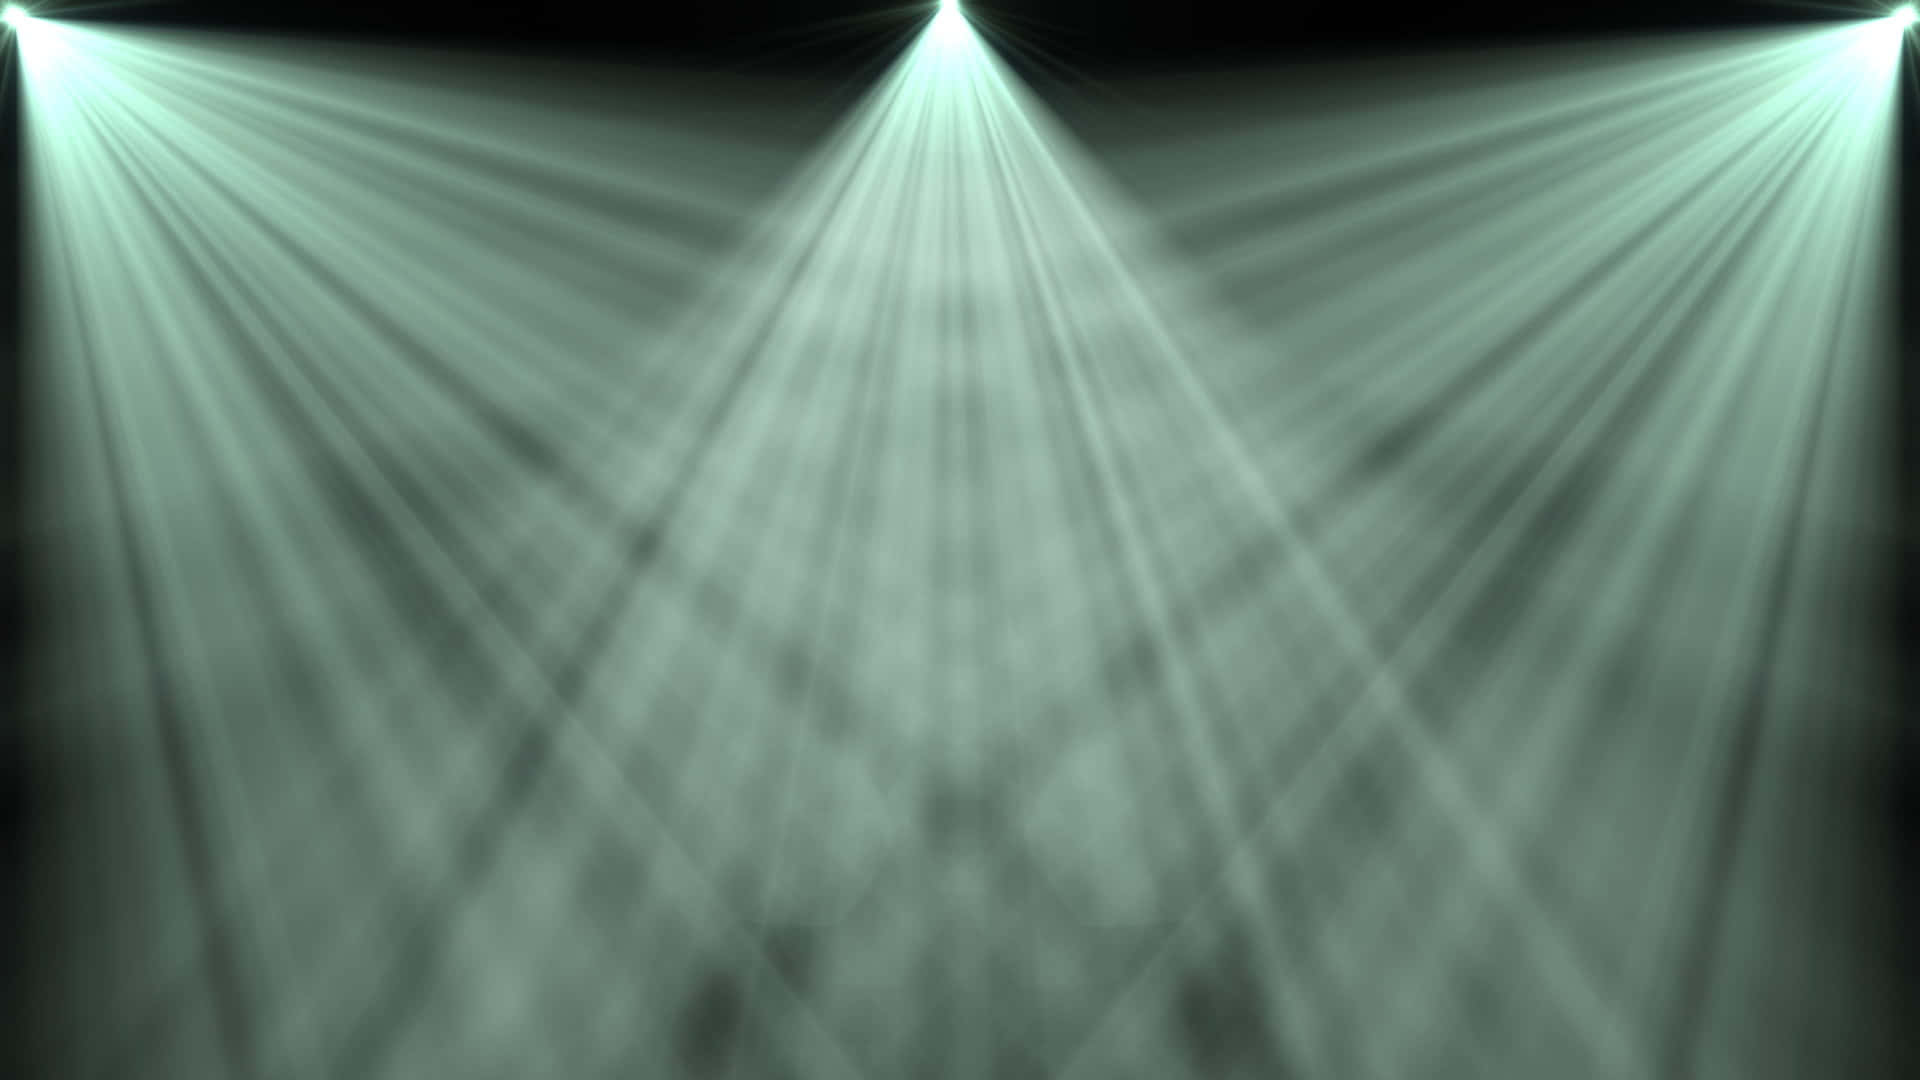 A Light Beam With A Green Background